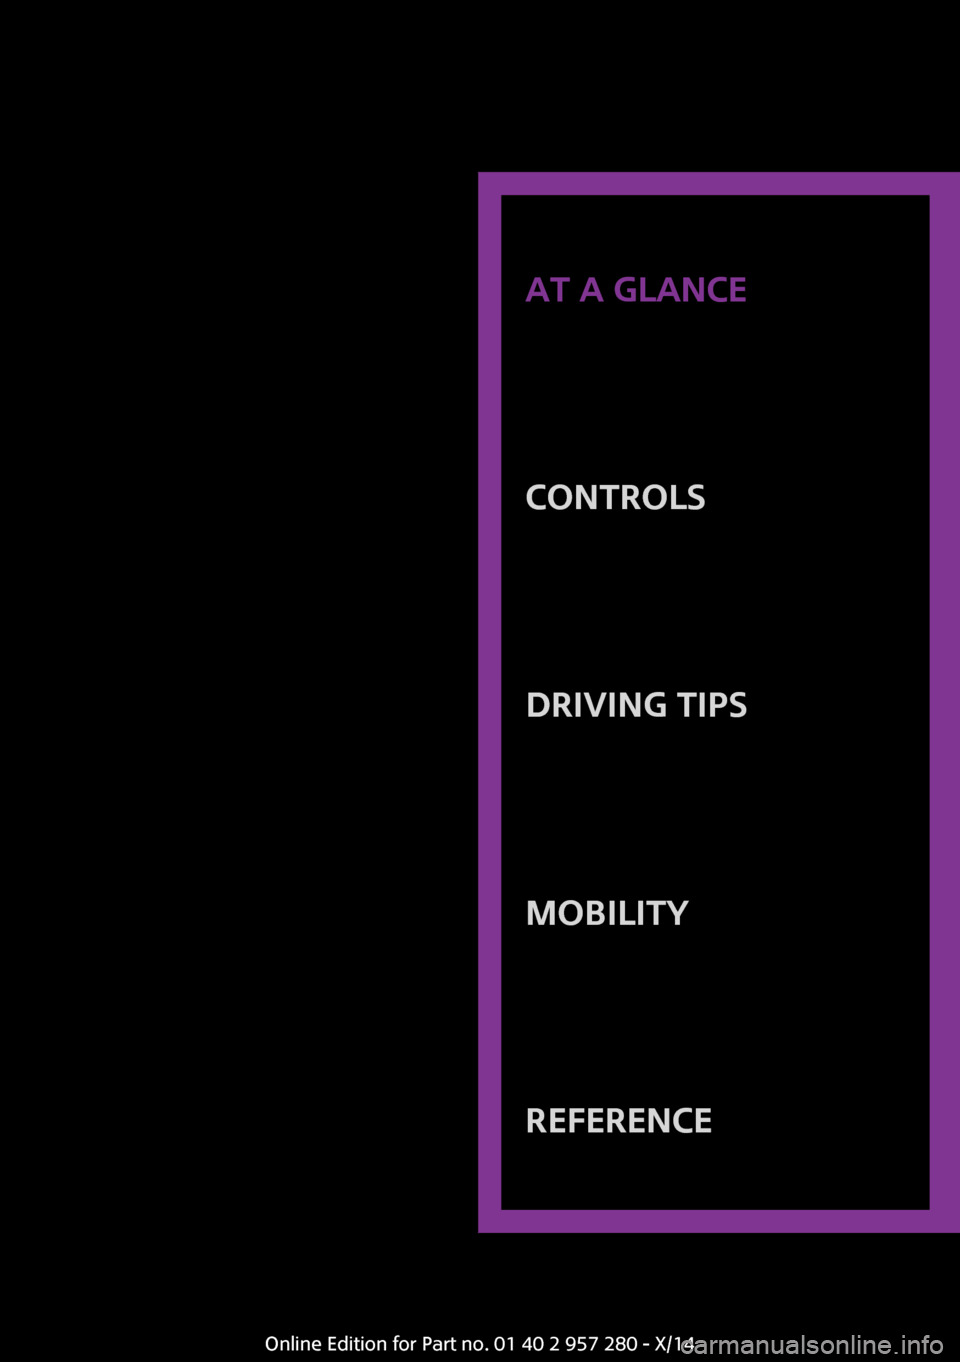 MINI 3 door 2014 User Guide AT A GLANCE
CONTROLSDRIVING TIPSMOBILITYREFERENCE
Online Edition for Part no. 01 40 2 957 280 - X/14 